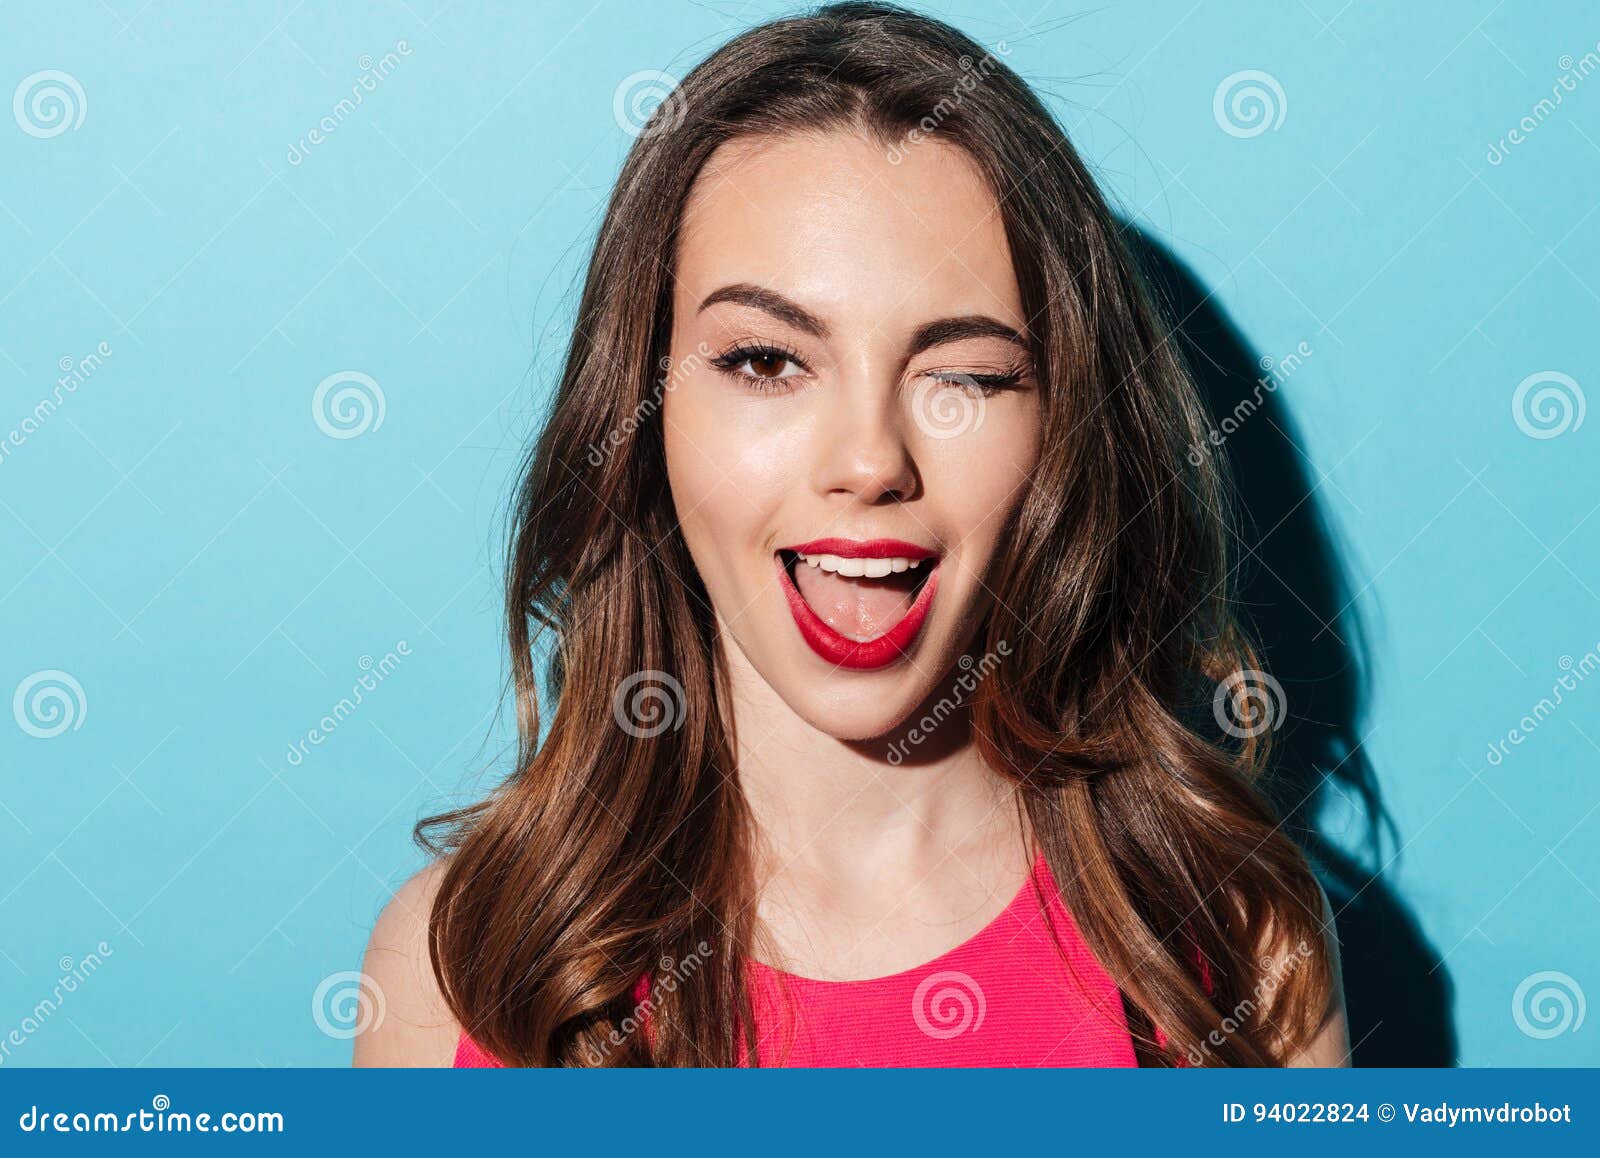 close up portrait of a pretty young woman winking